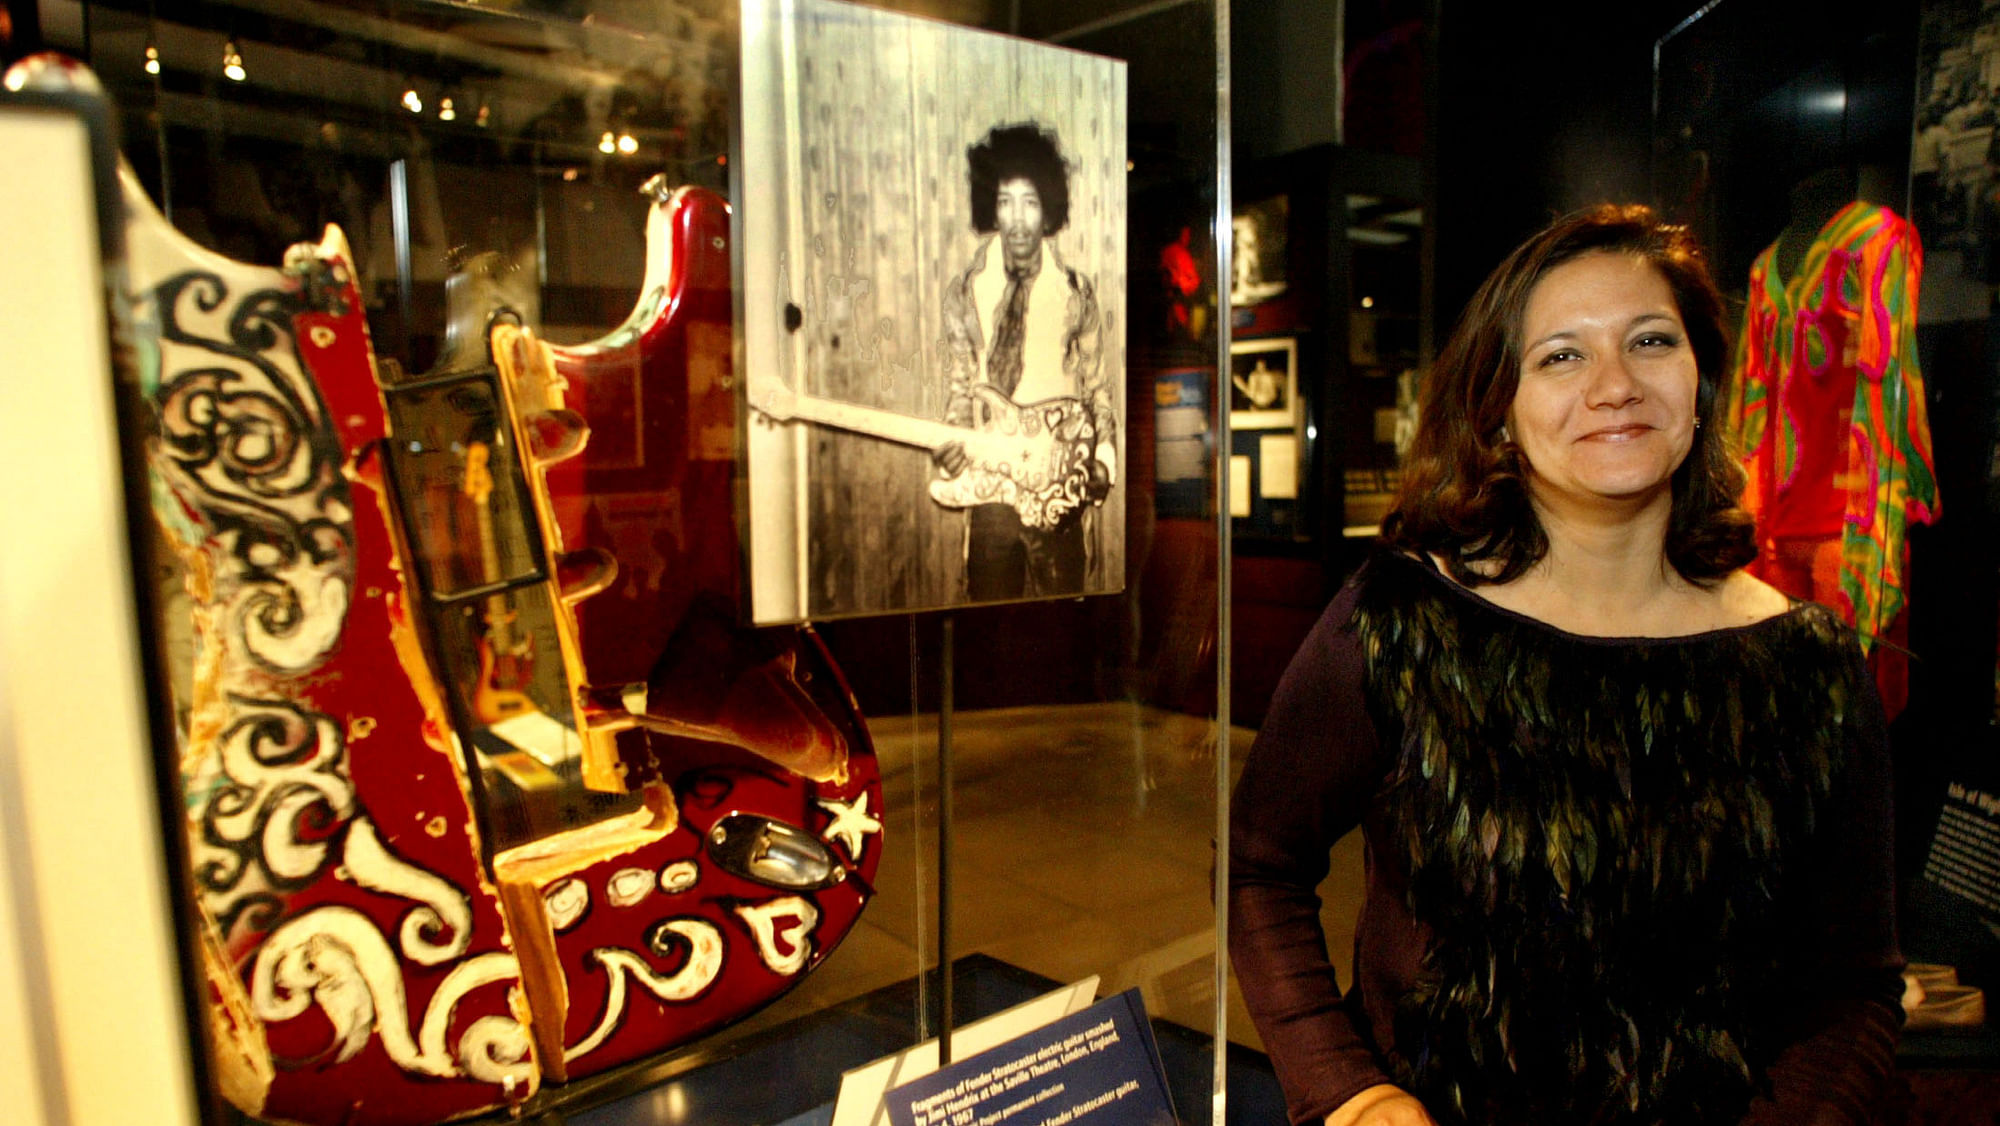 Janie Hendrix, sister of legendary musician Jimi Hendrix, stands next to of one of the&nbsp;displays at the Jimi Hendrix Gallery at the Experience Music Project (E.M.P.) in Seattle, Washington. (Photo: Reuters)